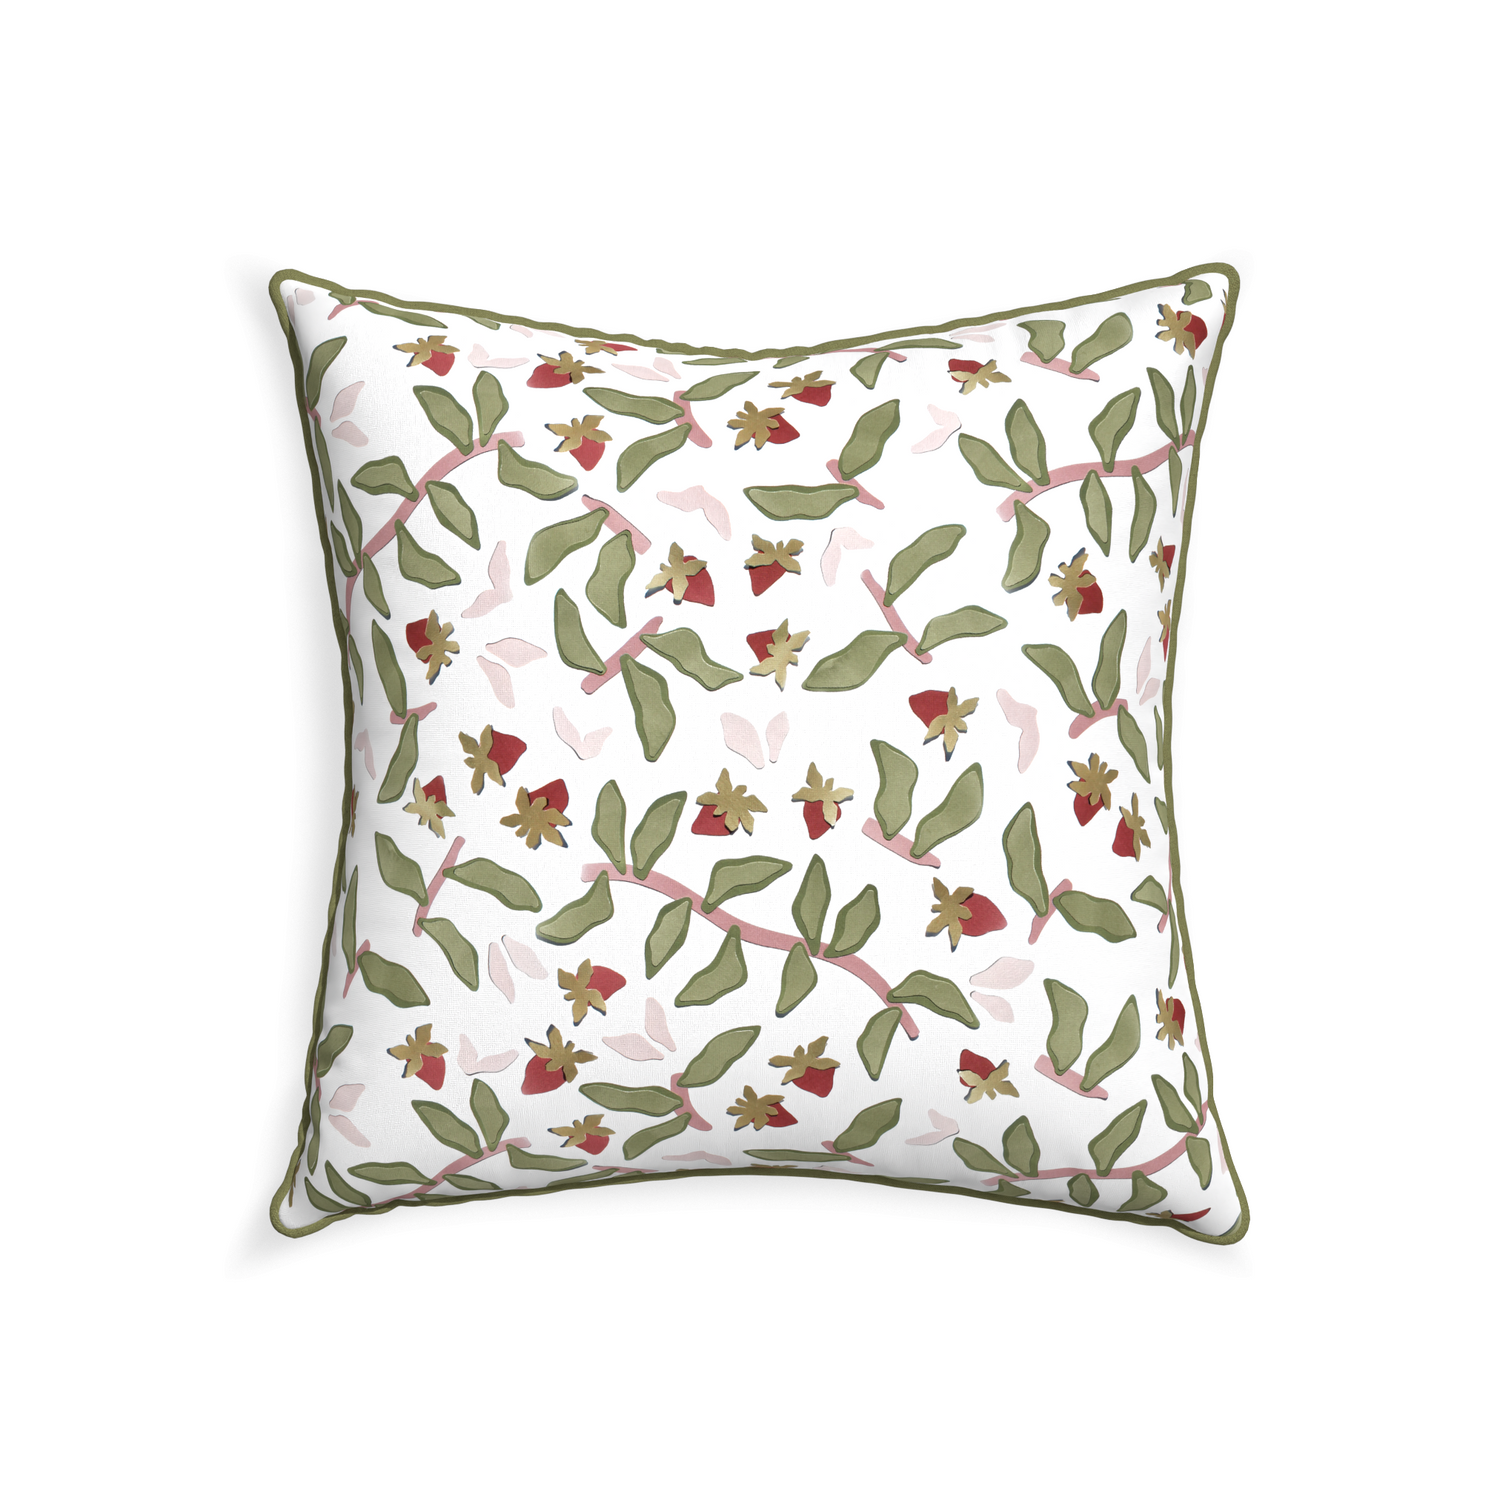 22-square nellie custom strawberry & botanicalpillow with moss piping on white background